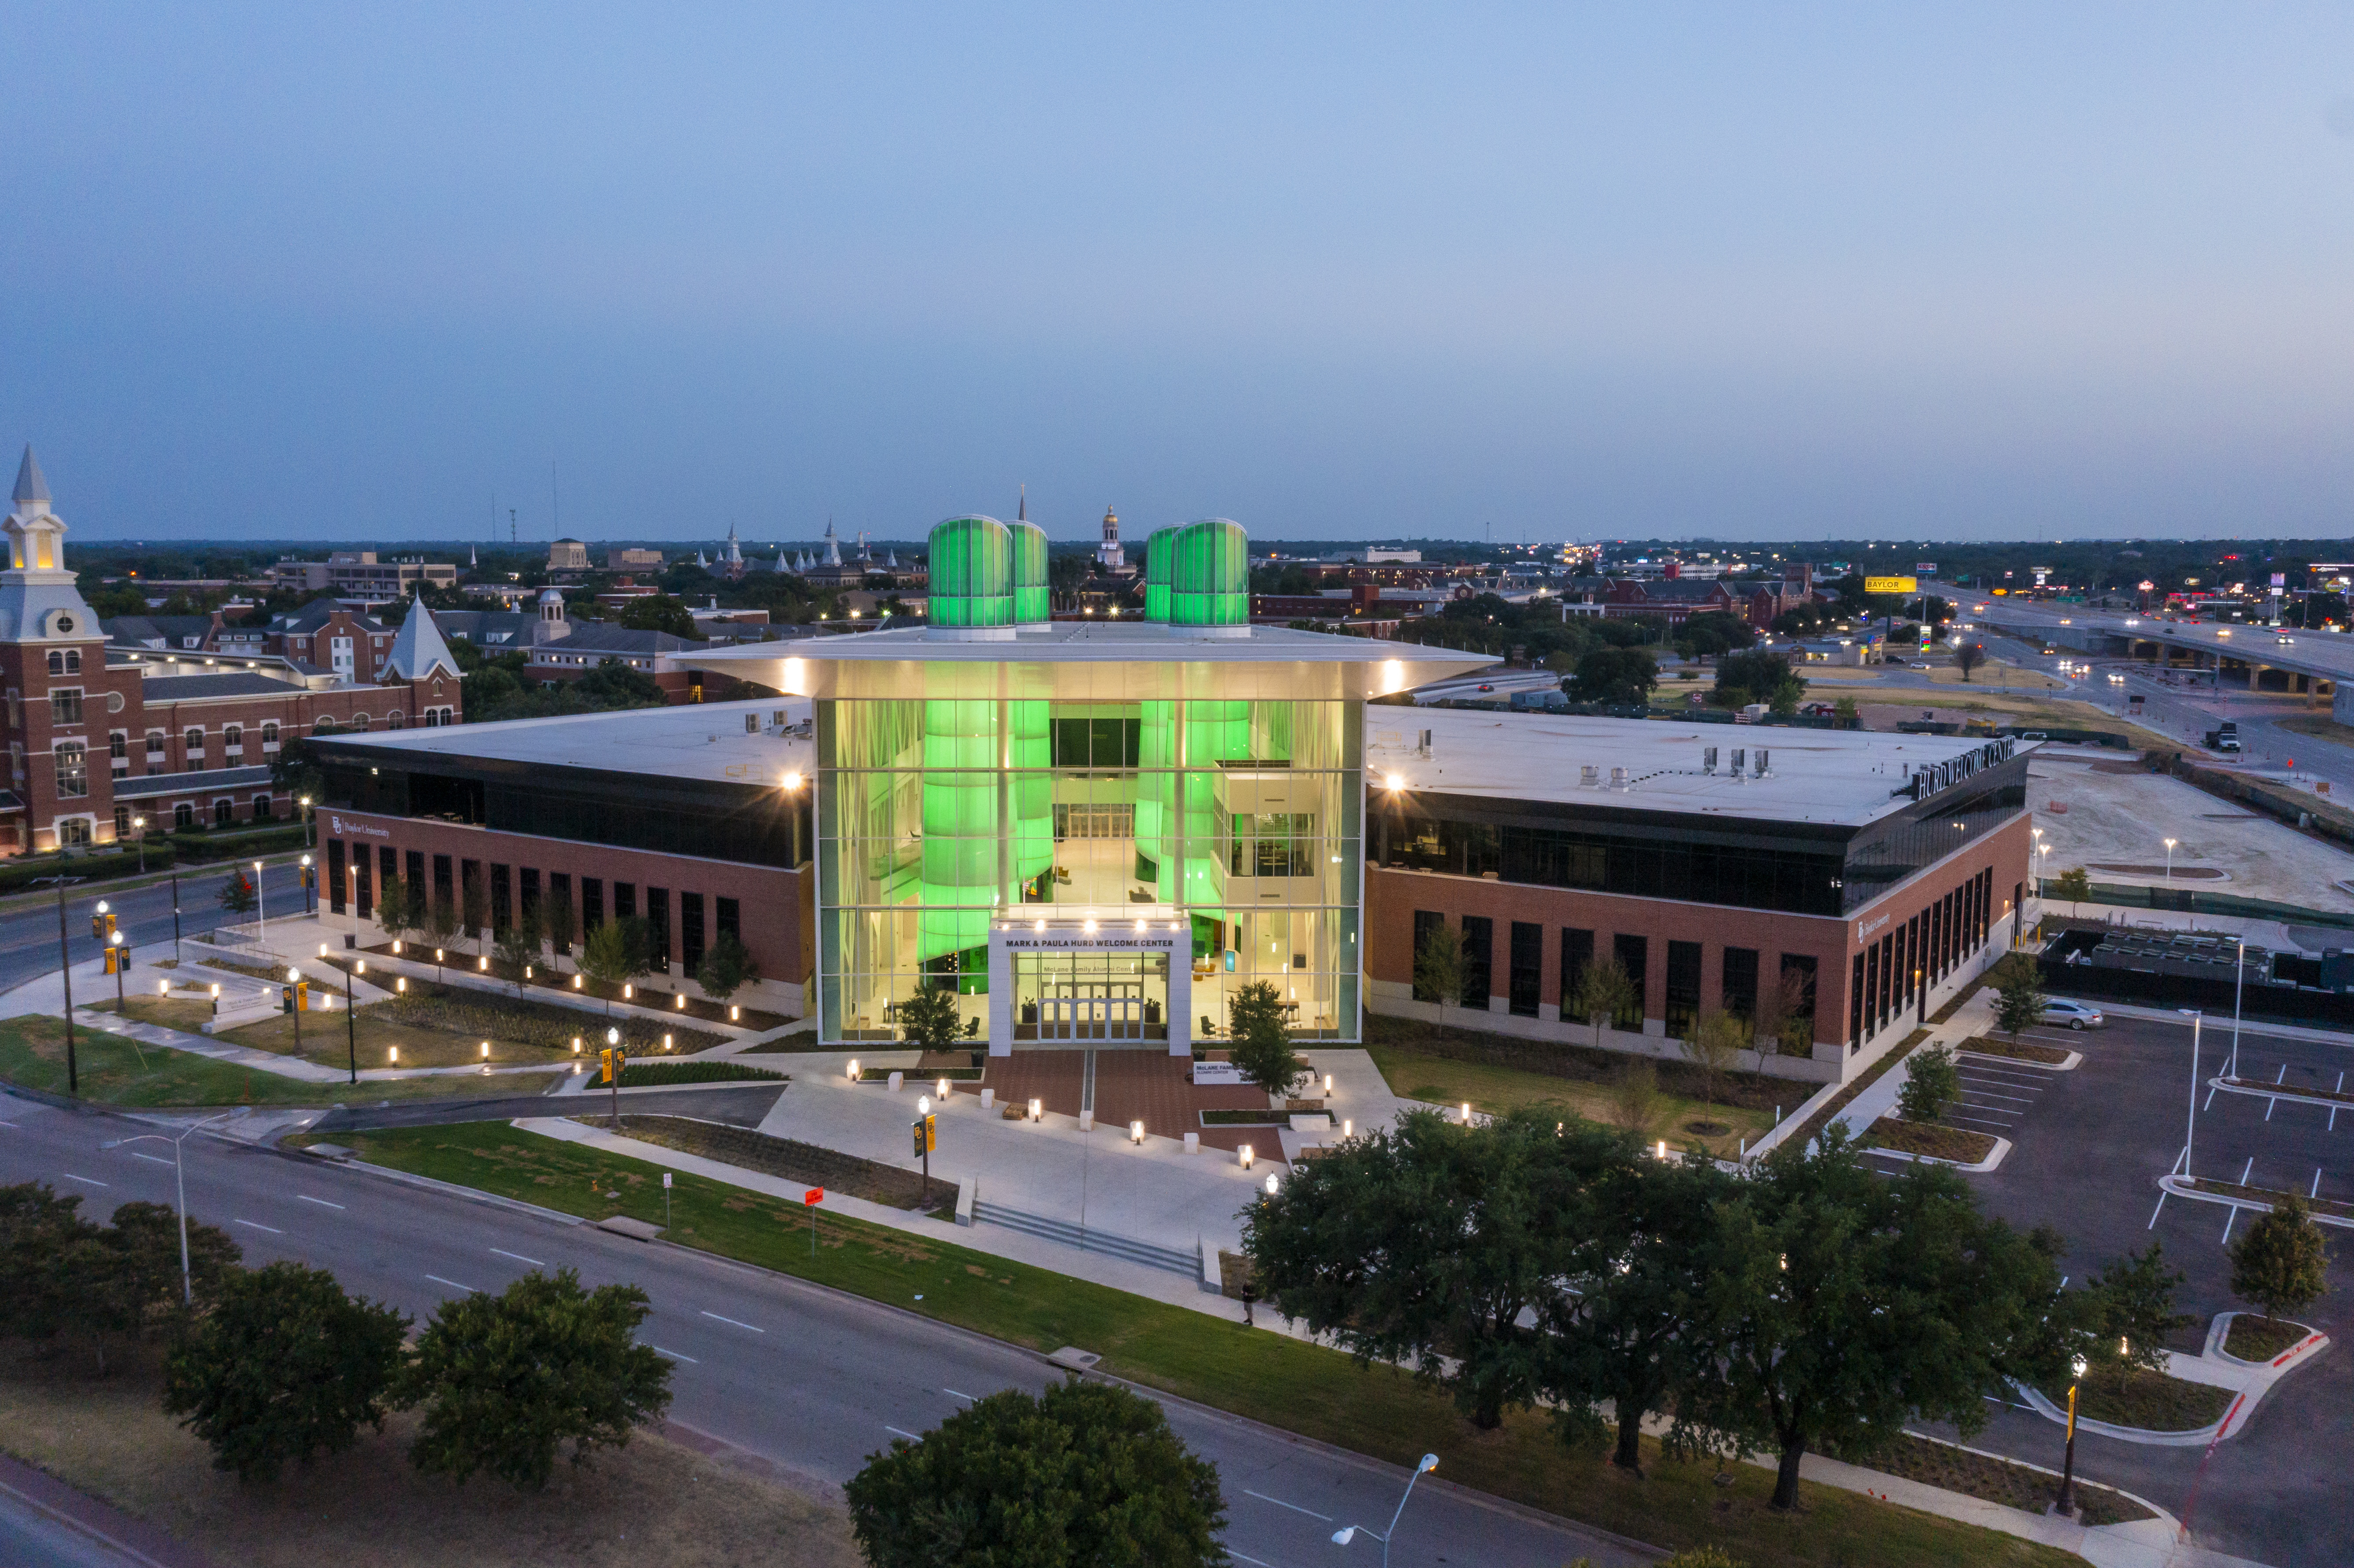 Arial view of the Hurd Welcome Center at night. The building's main towers are glowing in Baylor green lights. 